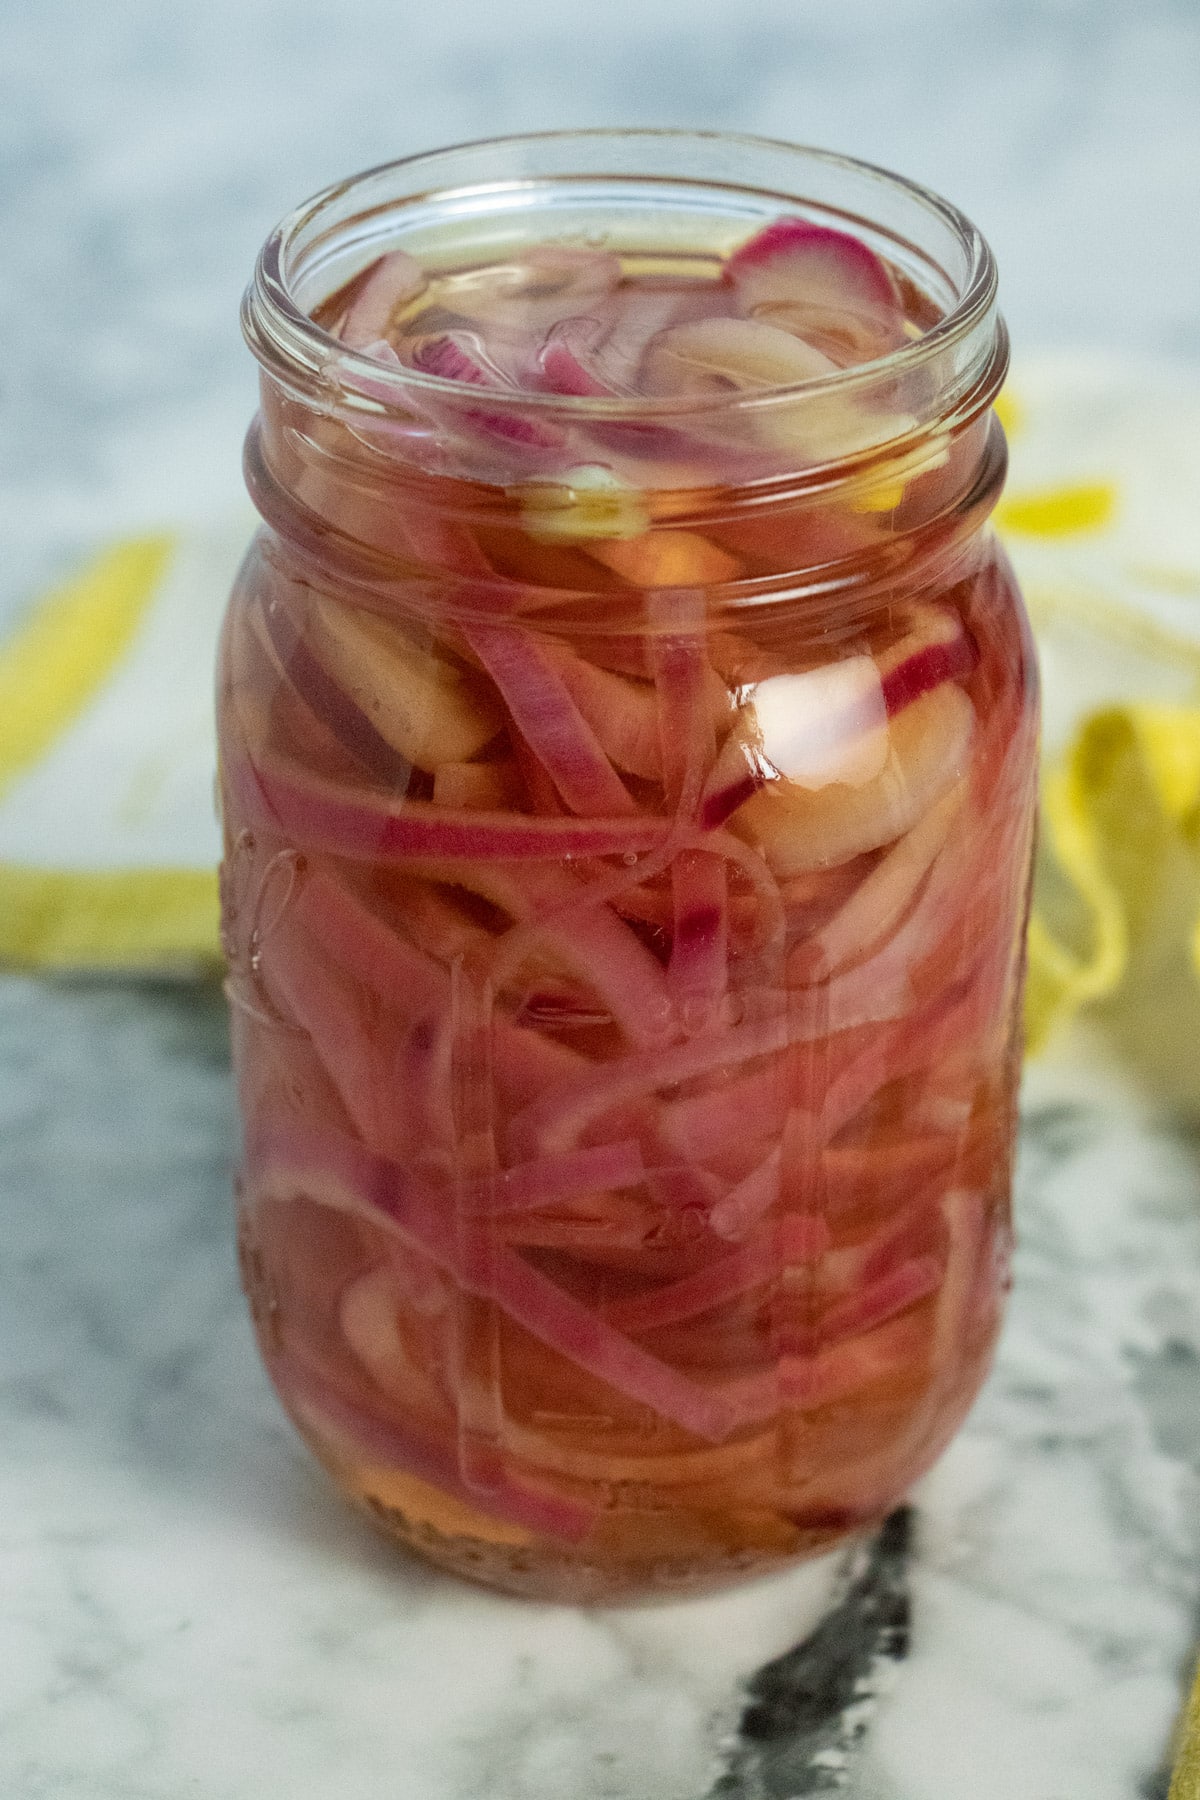 pint jar of sweet pickled onions on a marble tabletop with a yellow and white tea towel in the background